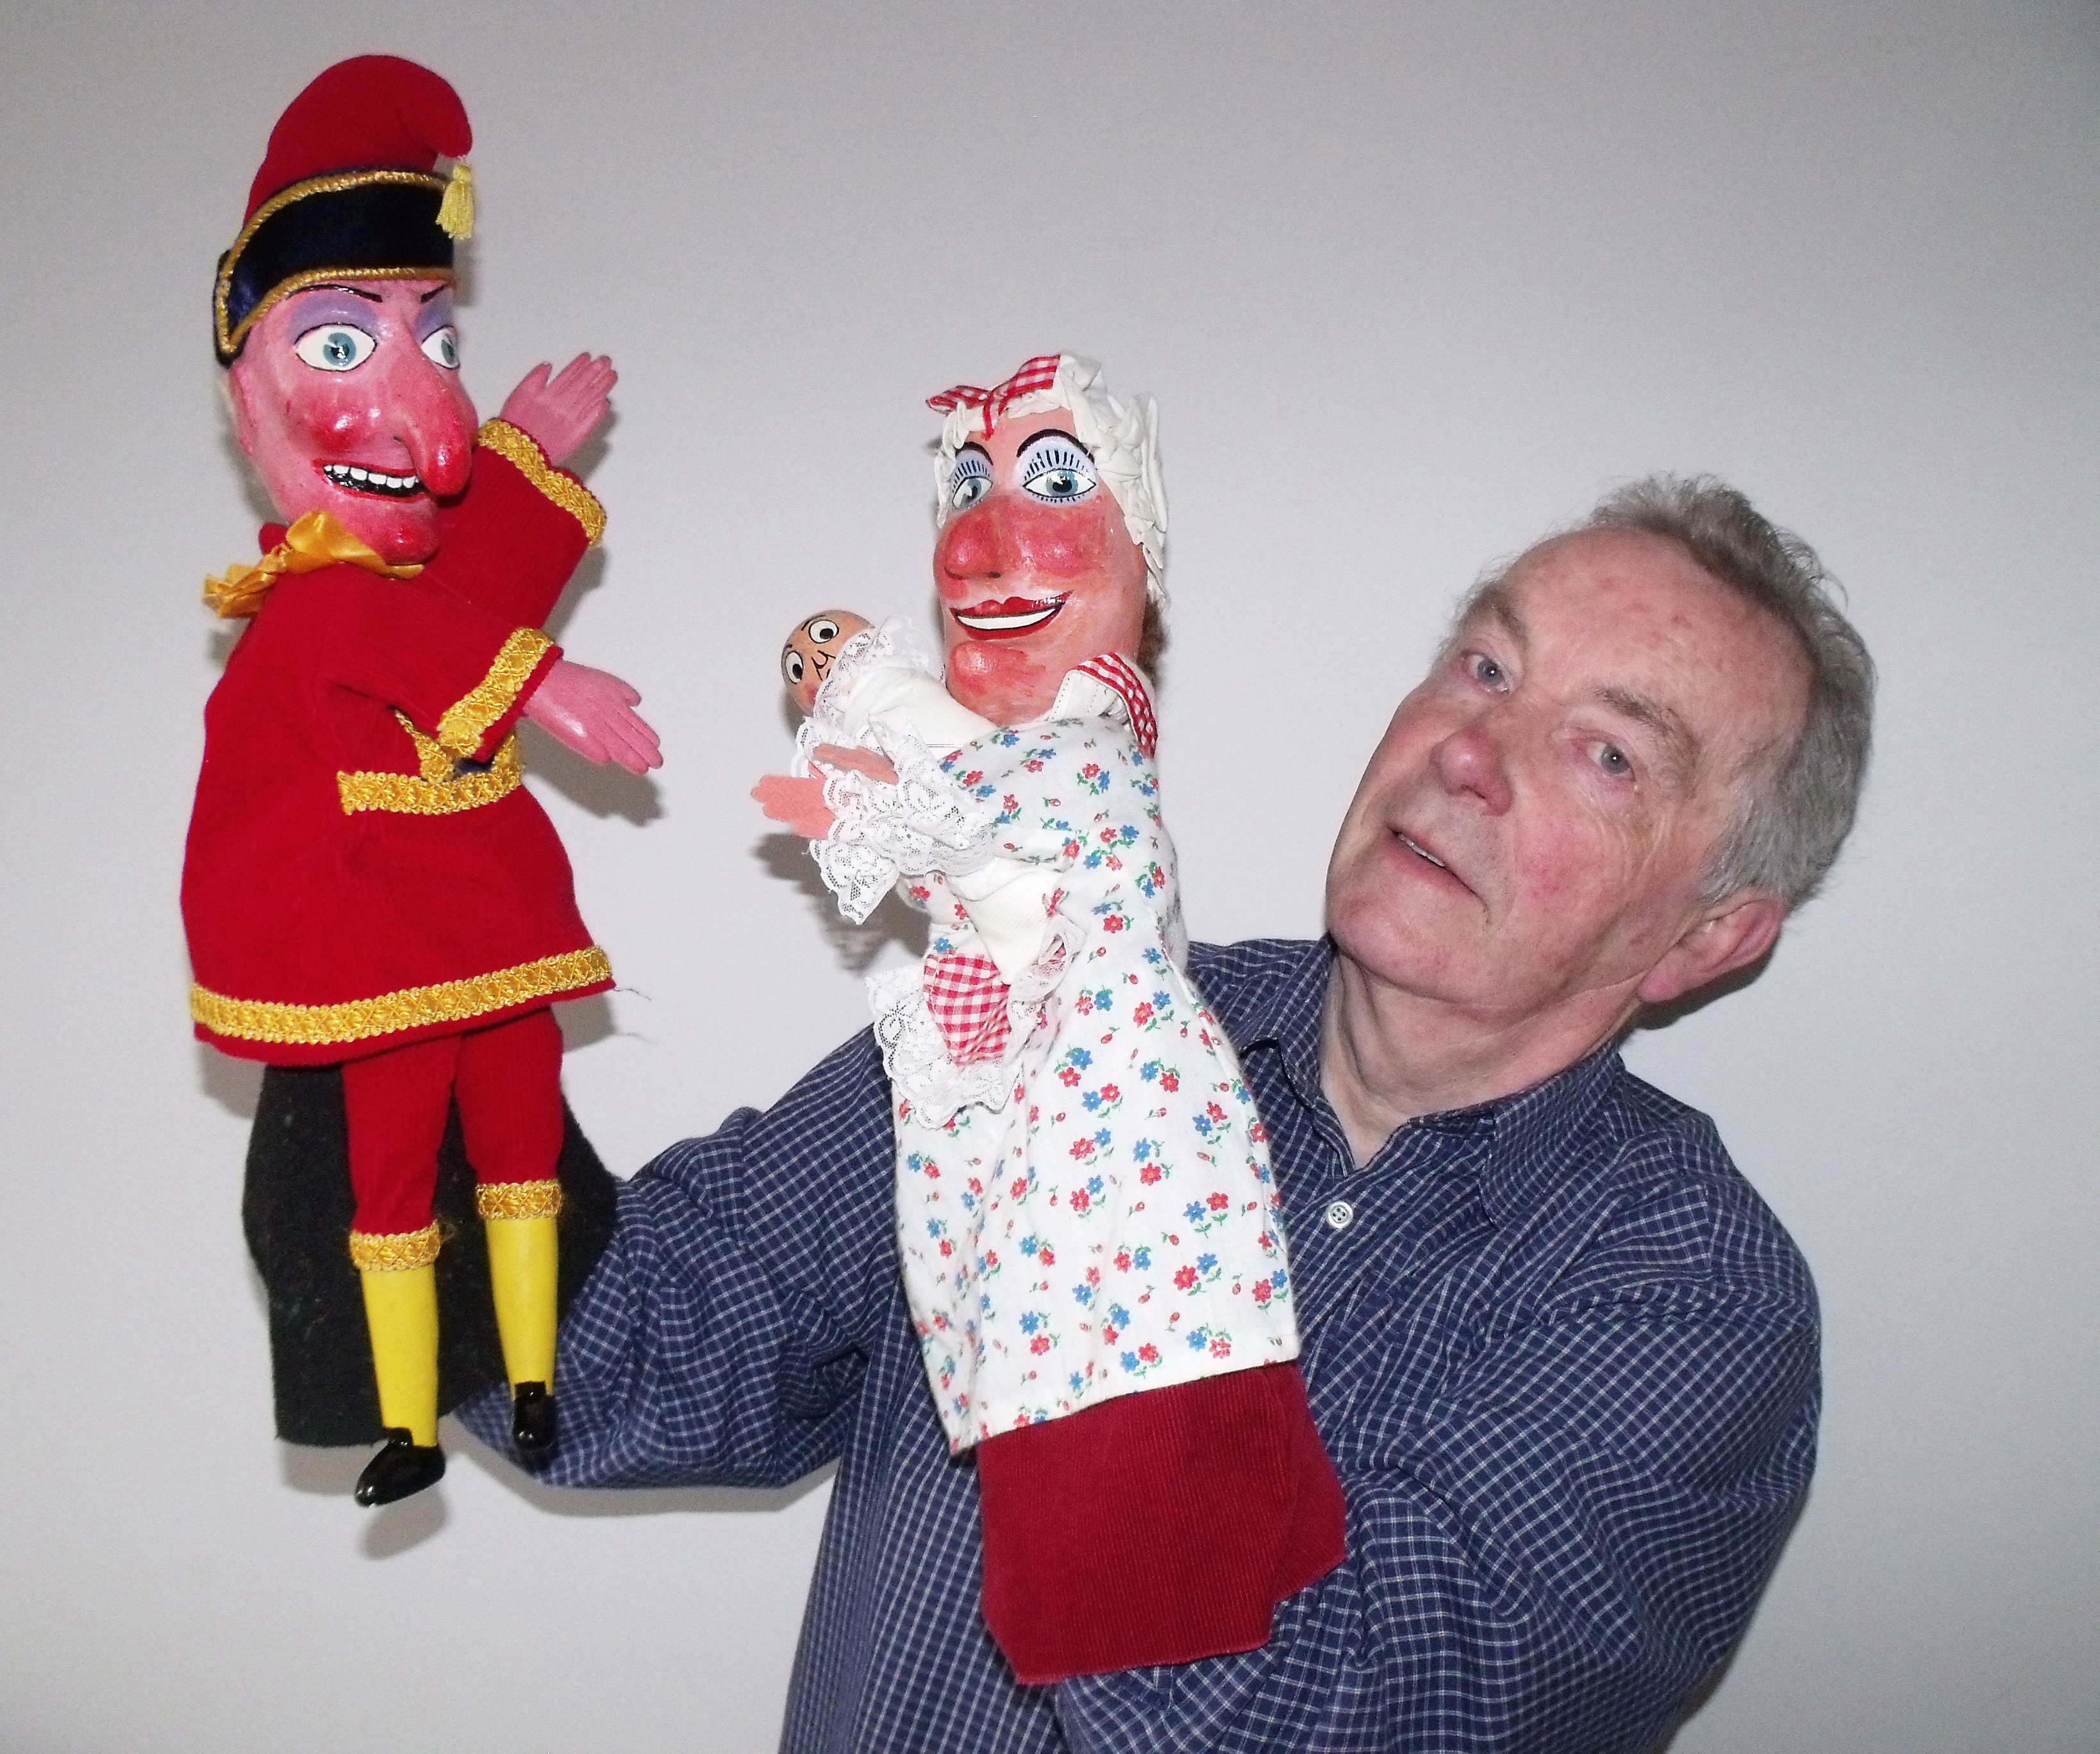 John with his Punch & Judy puppets